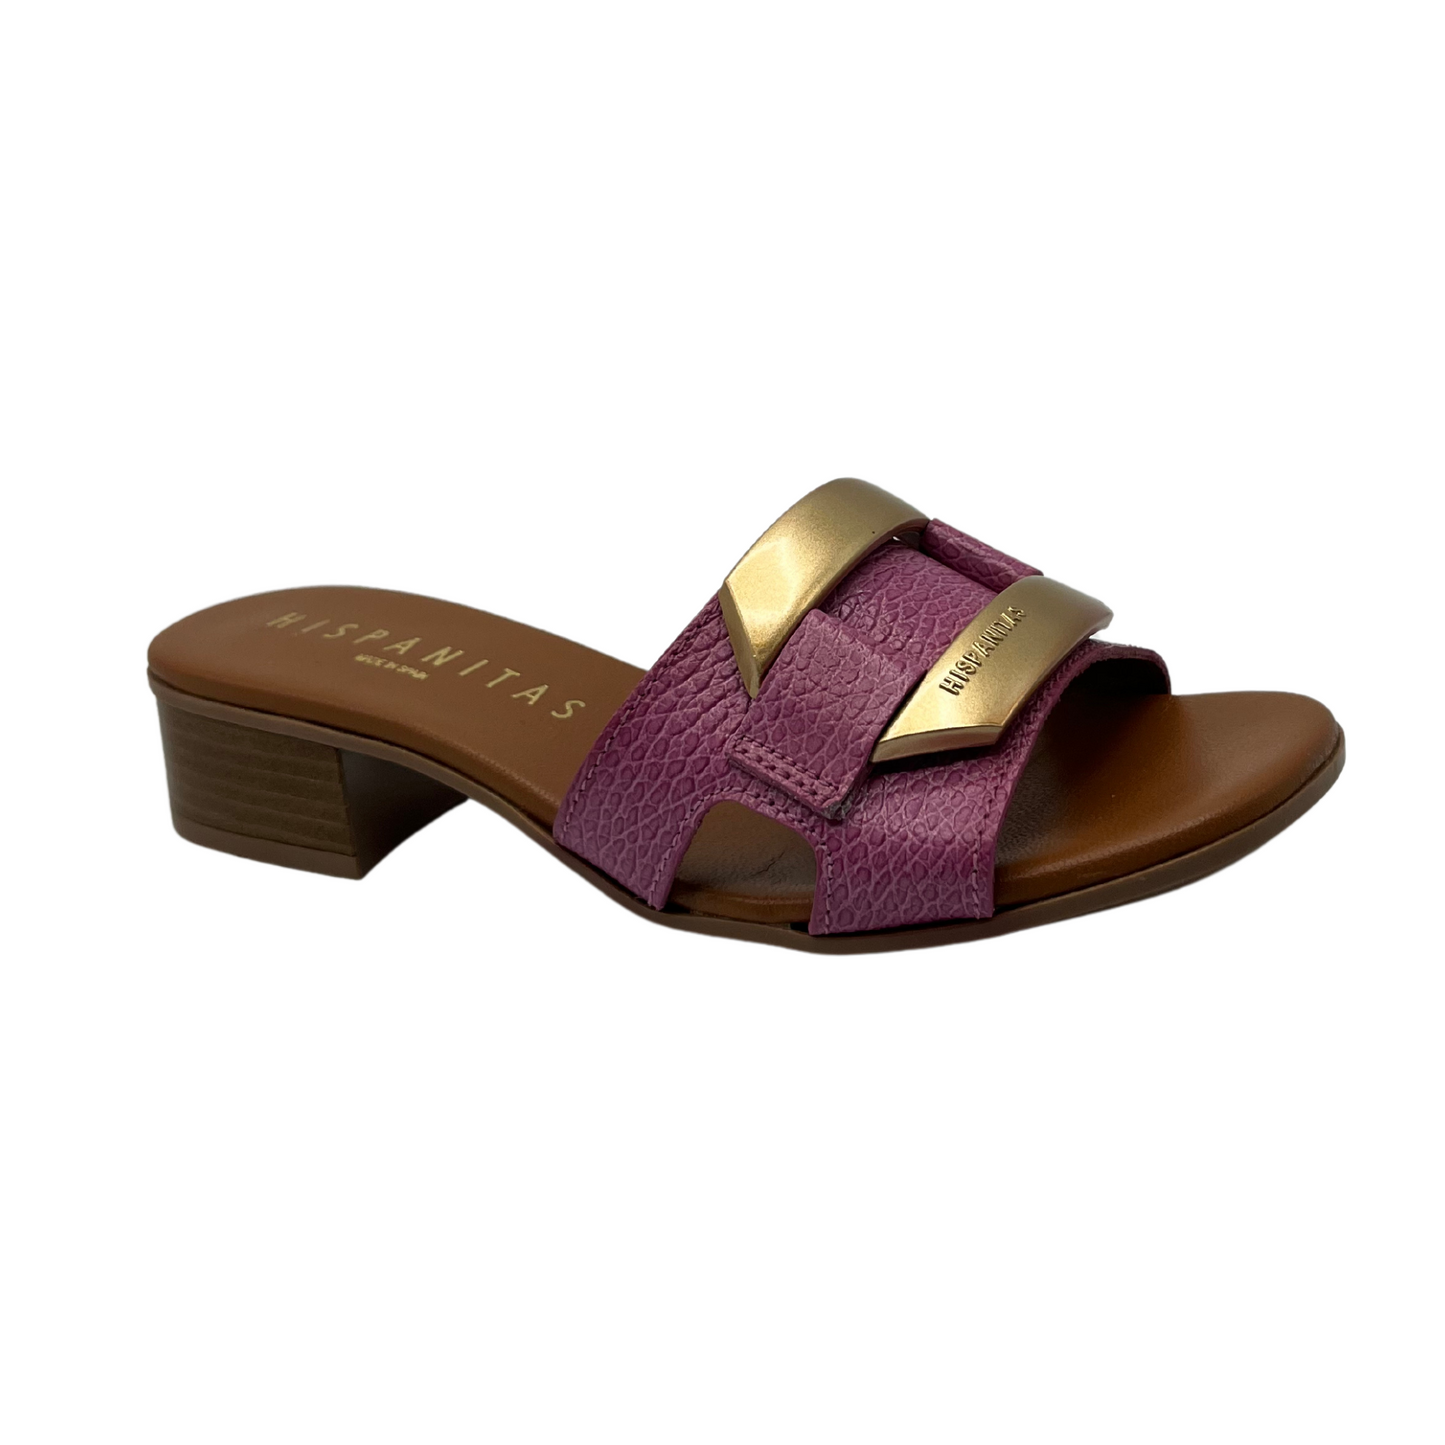 Right facing view of pink and brown leather sandal with gold brooch detail on upper